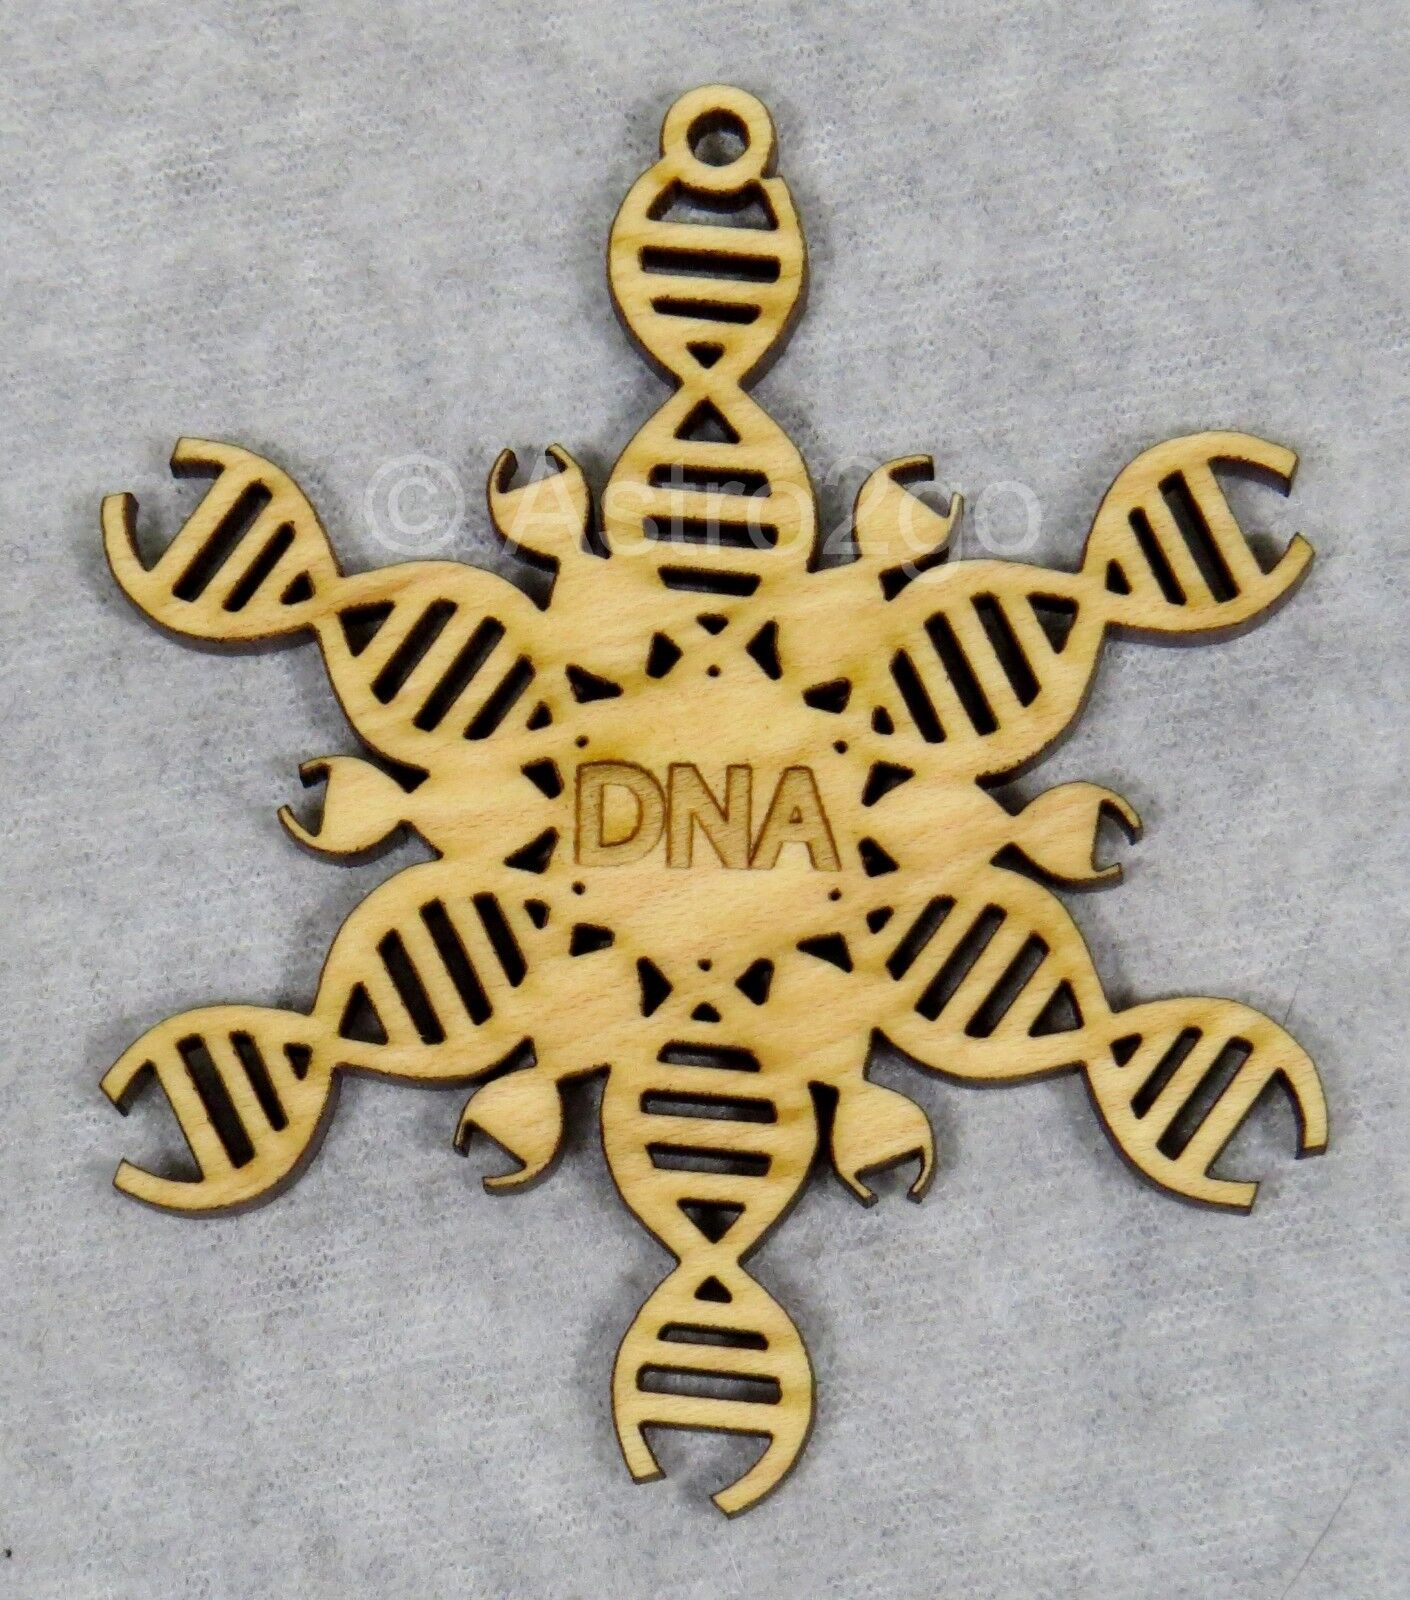 DNA SNOWFLAKE--Double Helix Biology Genome Science Nestled Pines wooden ornament